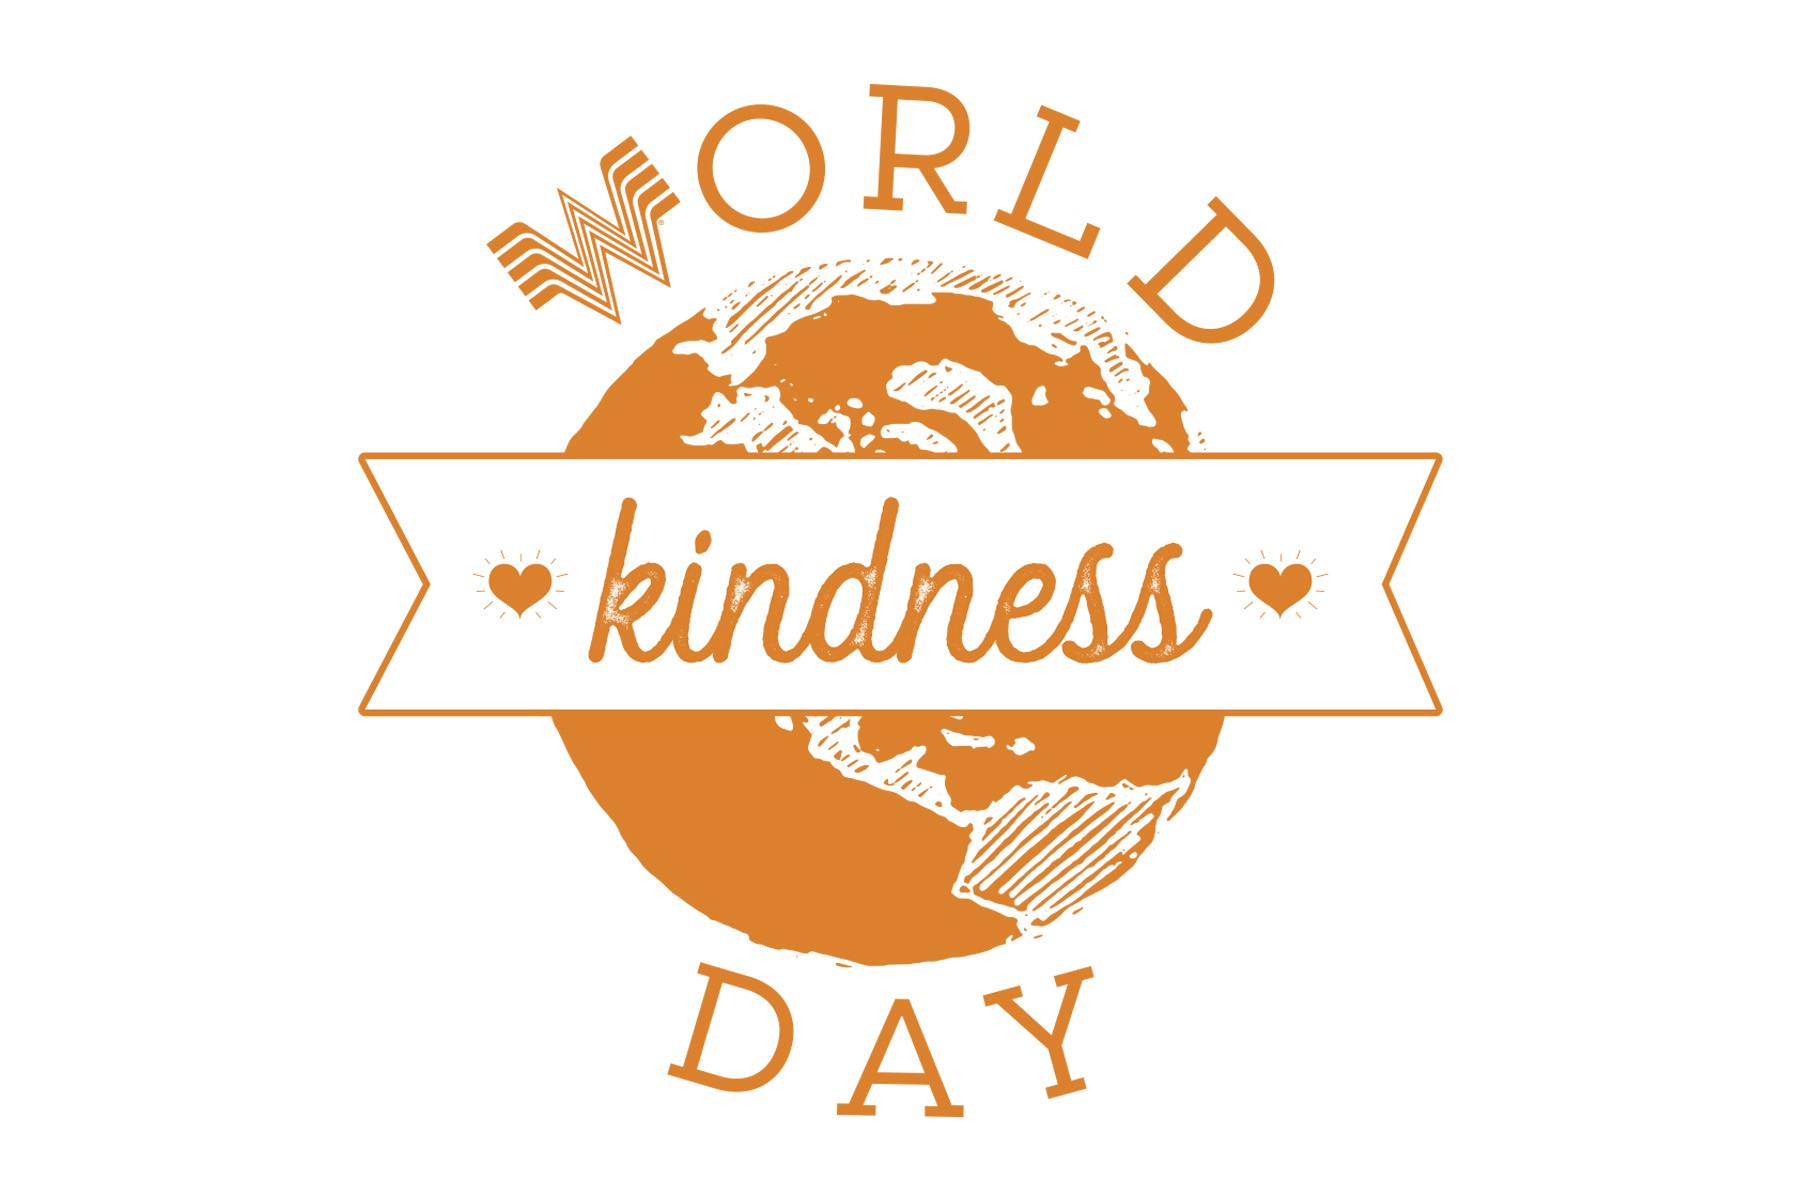 To celebrate World Kindness Day, we took over the internet.